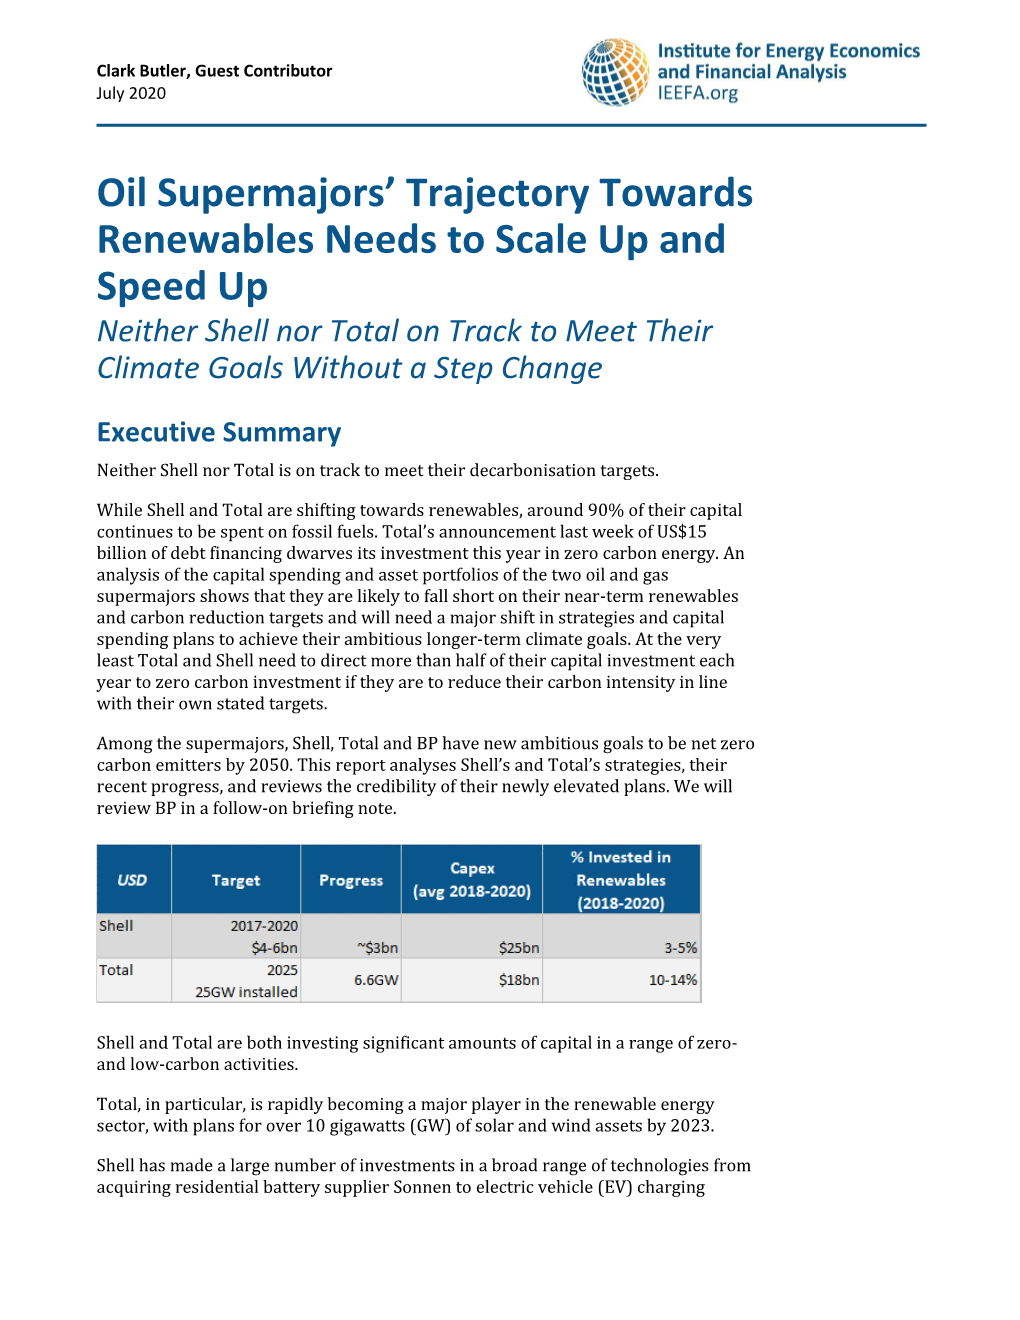 Oil Supermajors' Trajectory Towards Renewables Needs to Scale Up